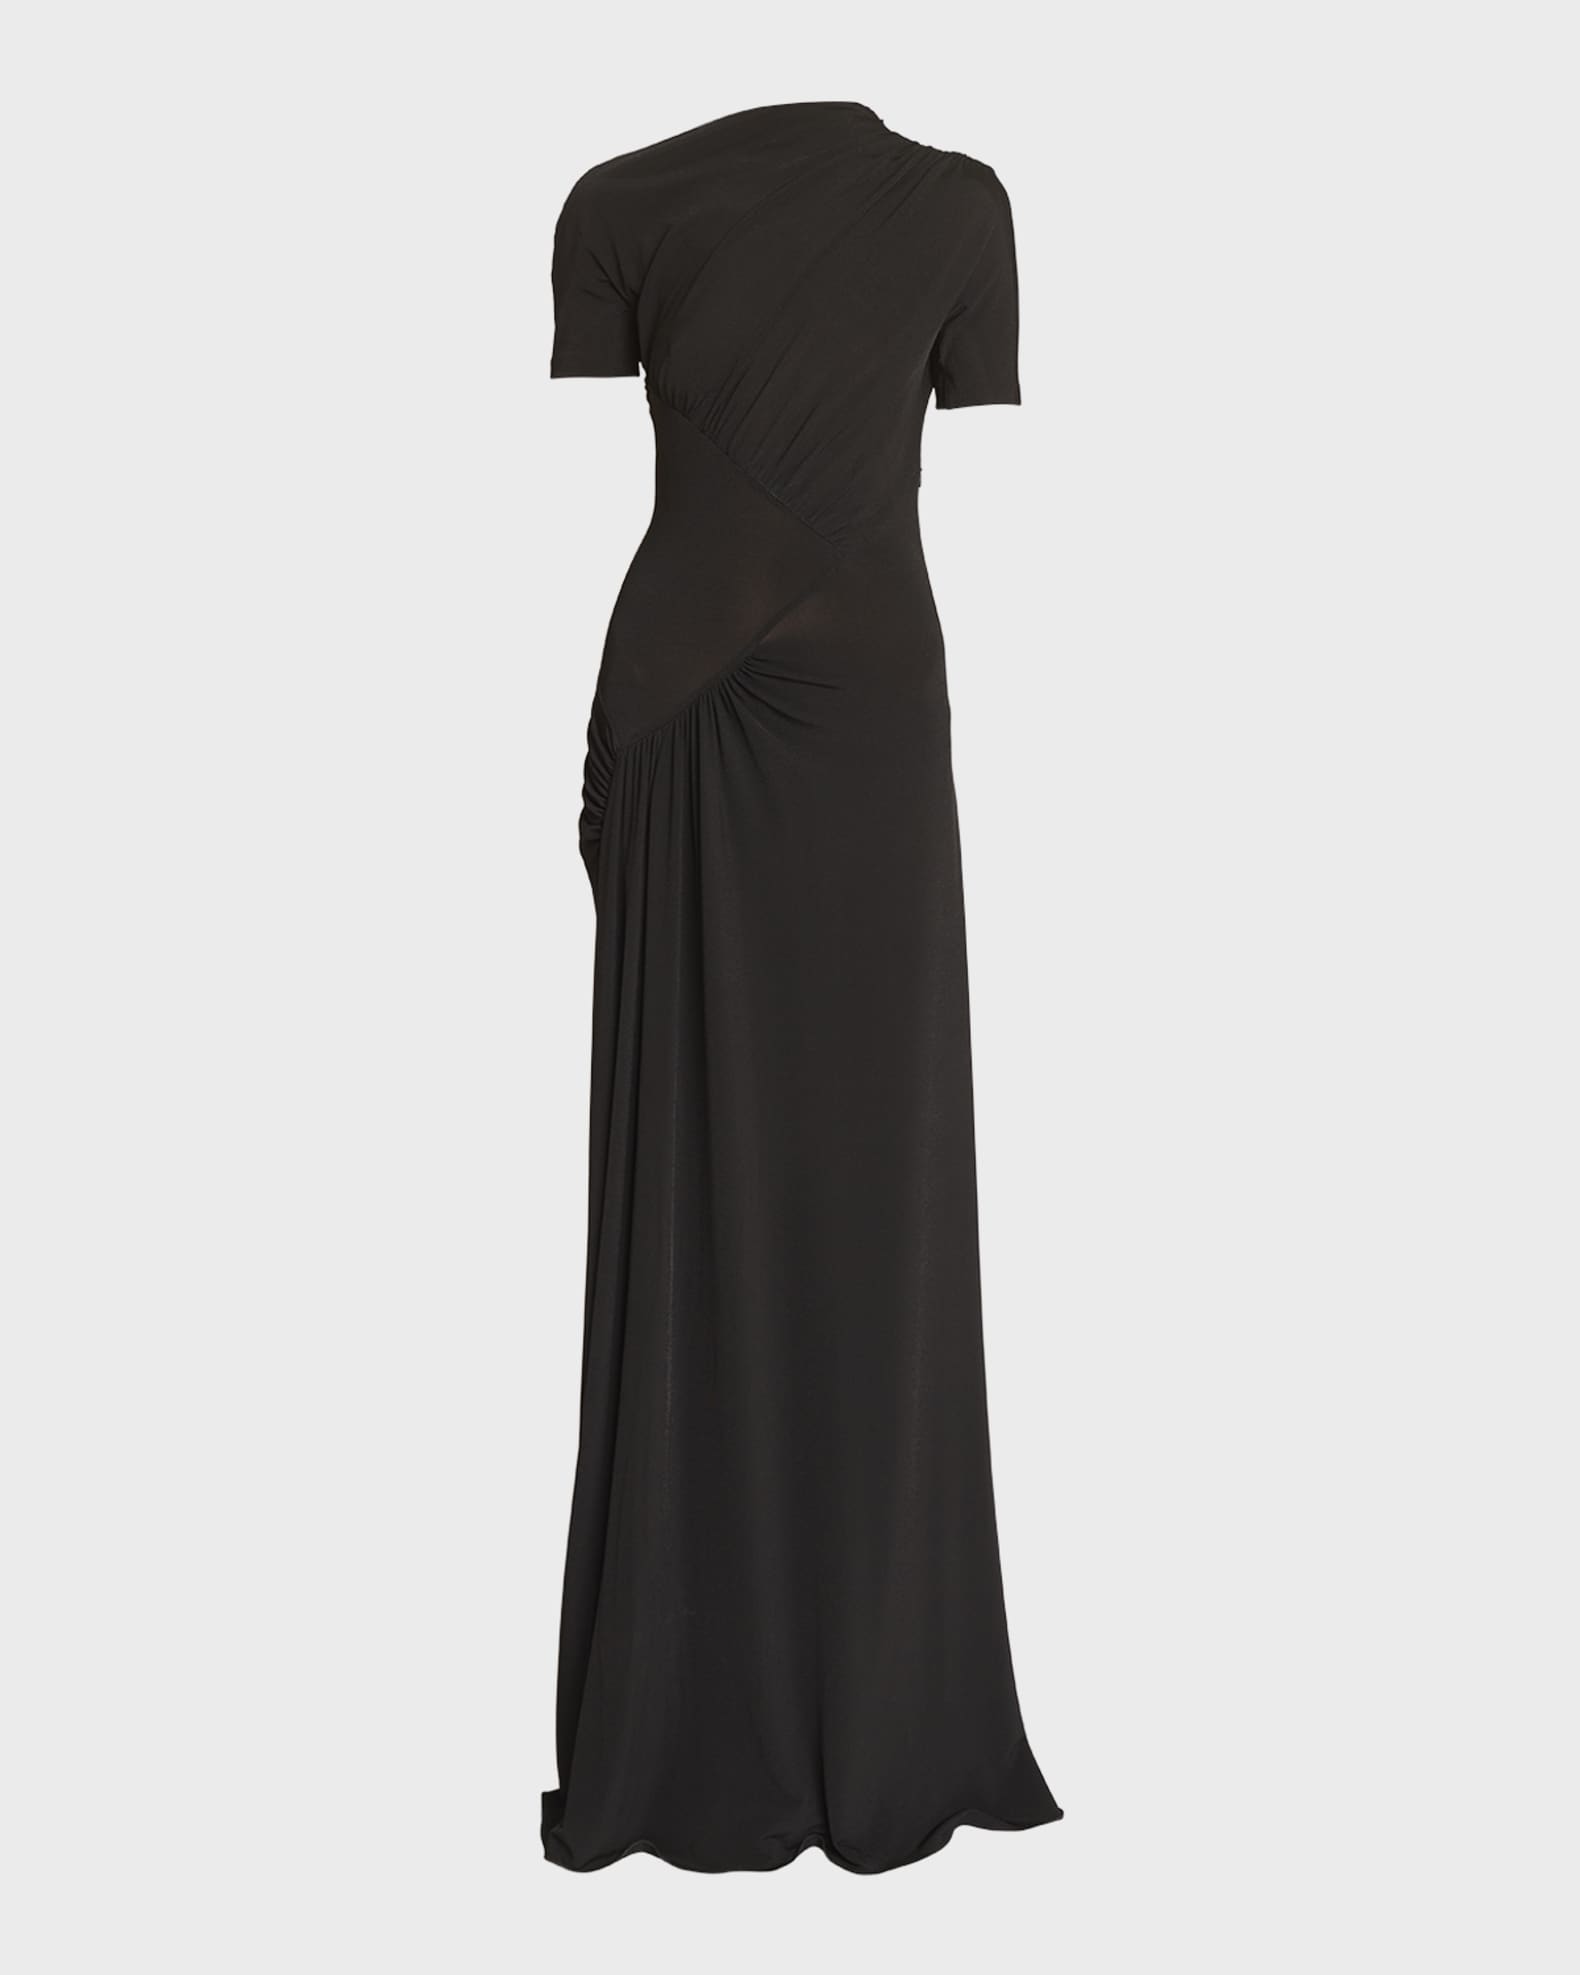 Givenchy Draped Jersey Gown with Sheer Inset Detail | Neiman Marcus